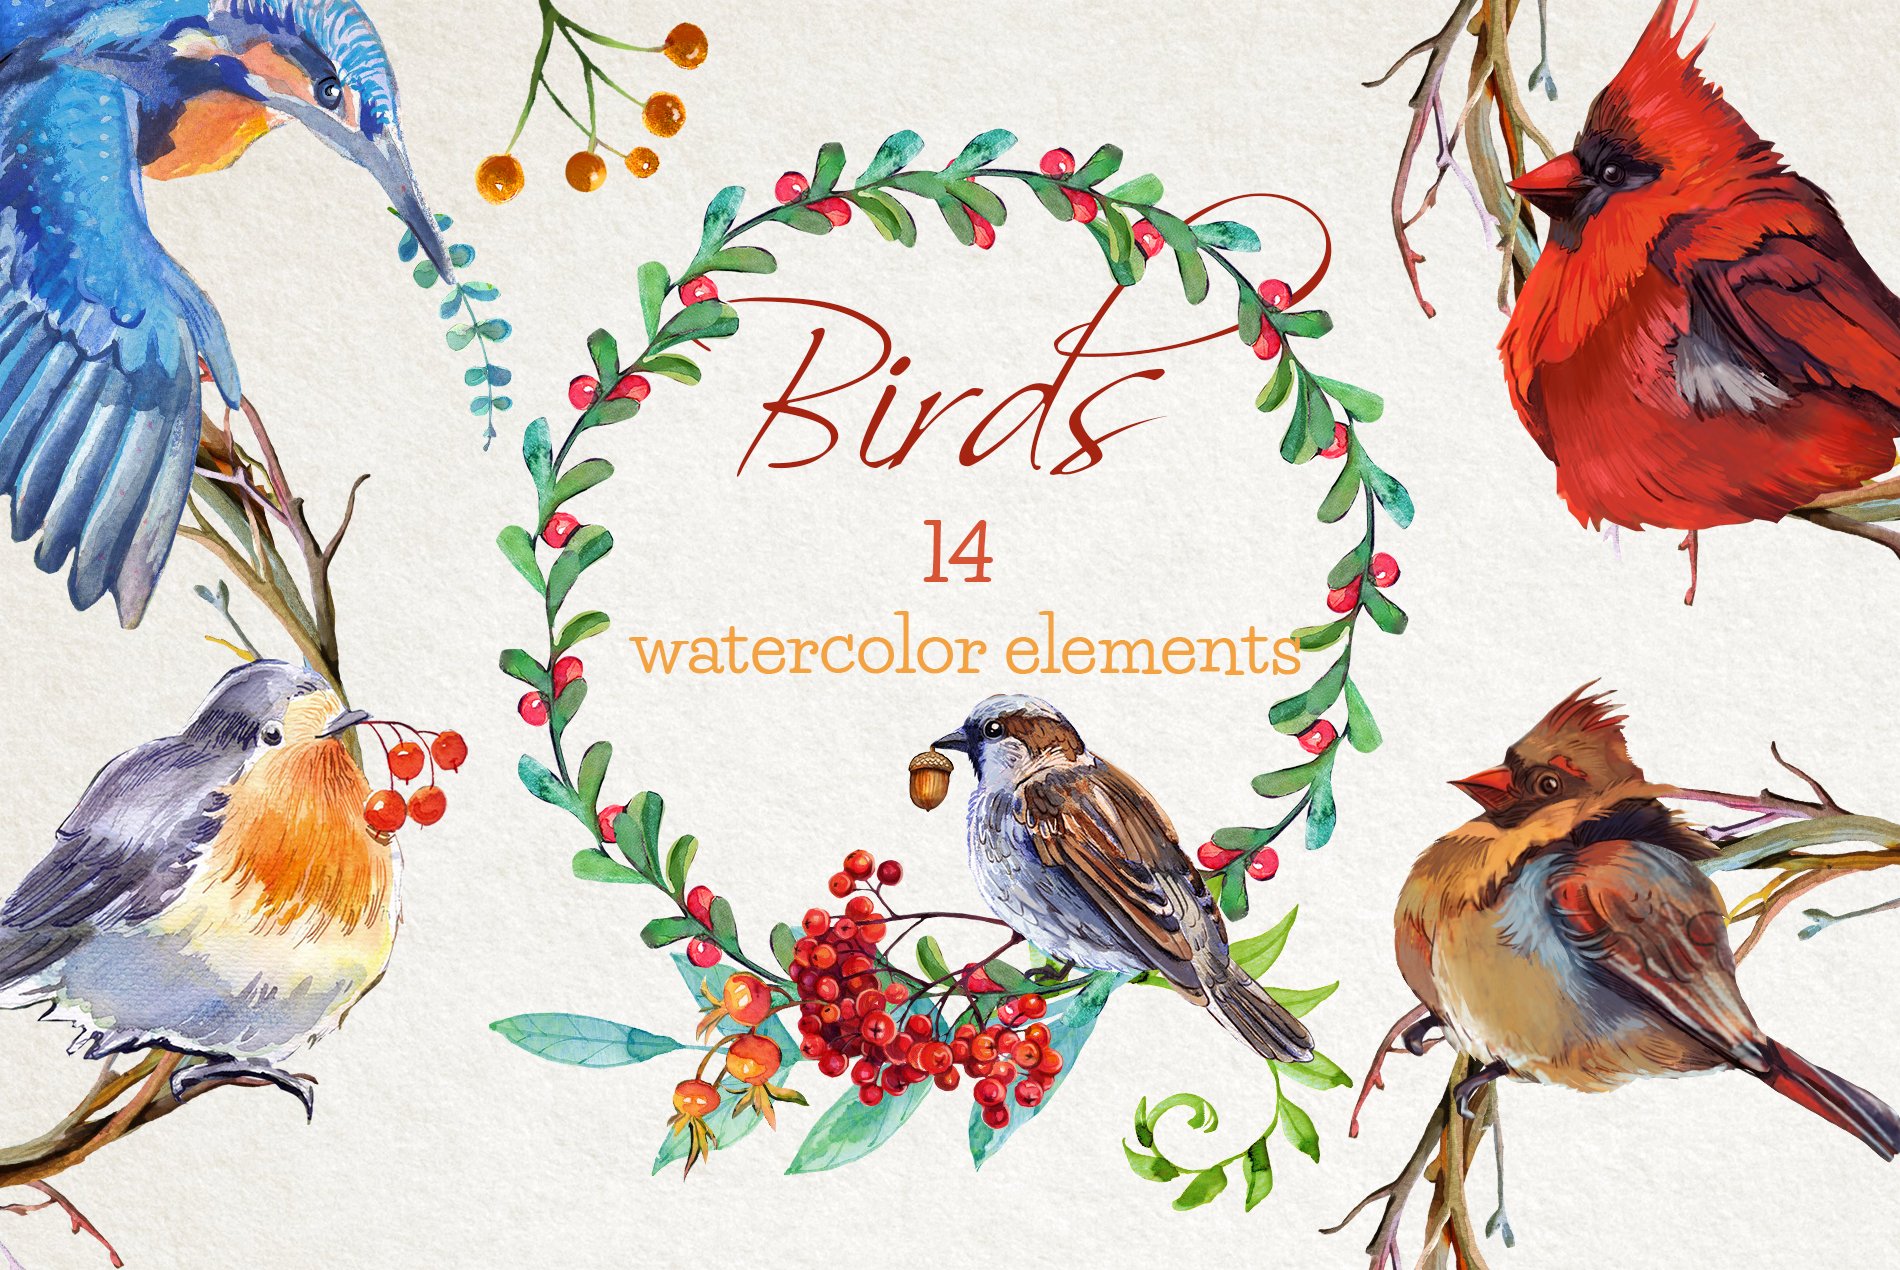 Cool bright birds collection.